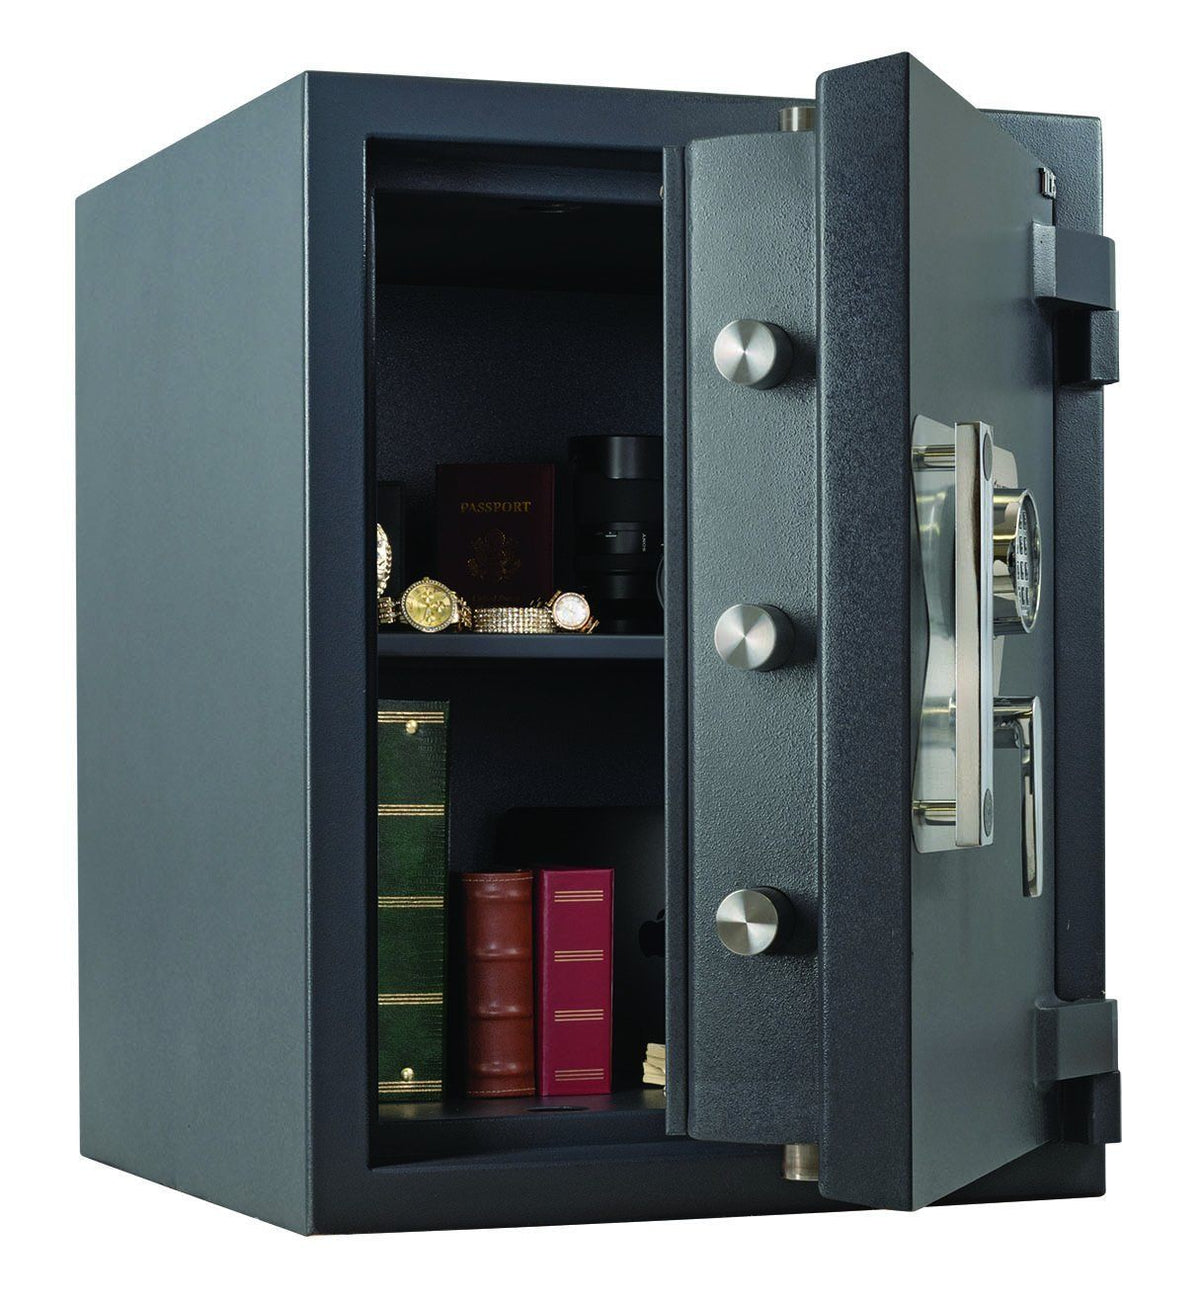 AMSEC MAX2518 High Security UL Listed TL-15 Composite Safe Door Open Full